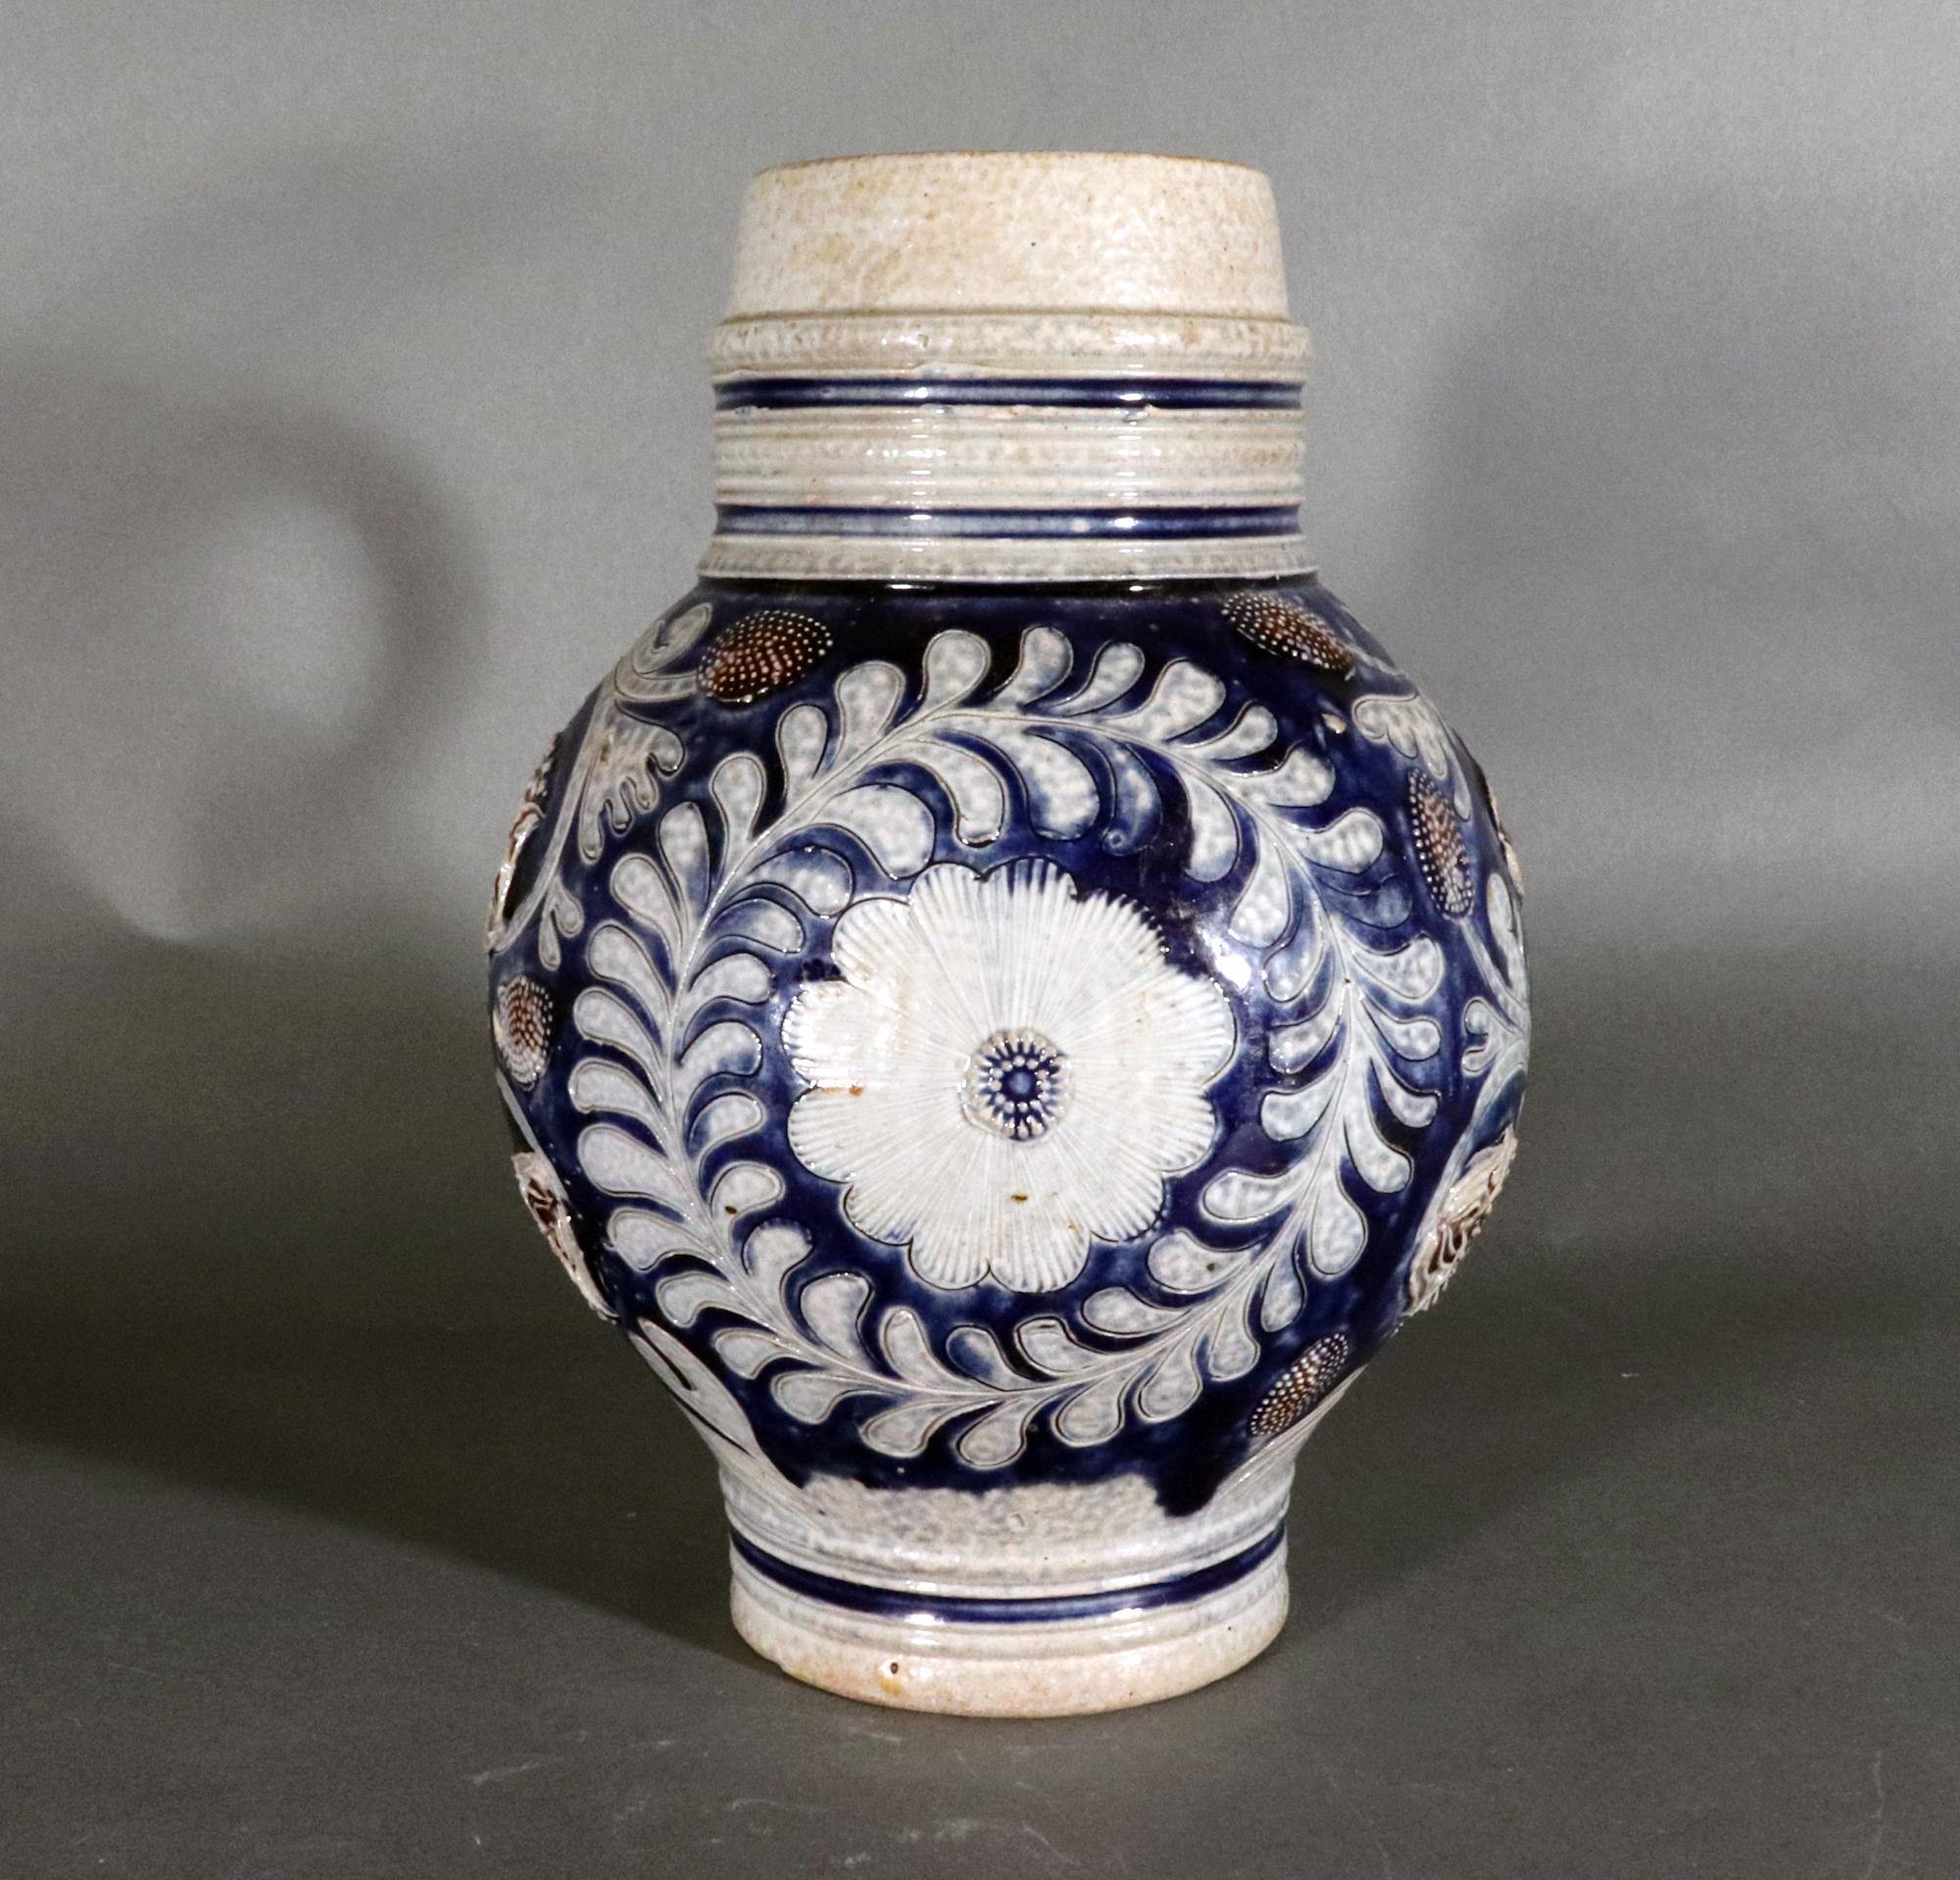 Westerwald Blue & Manganese Stoneware Jug,
17th Century

The blue and gray jug molded with incised scrolling flower stems and molded flower heads.  There is a central flower head roundel with a molded leaf surround.  To each side are similar designs